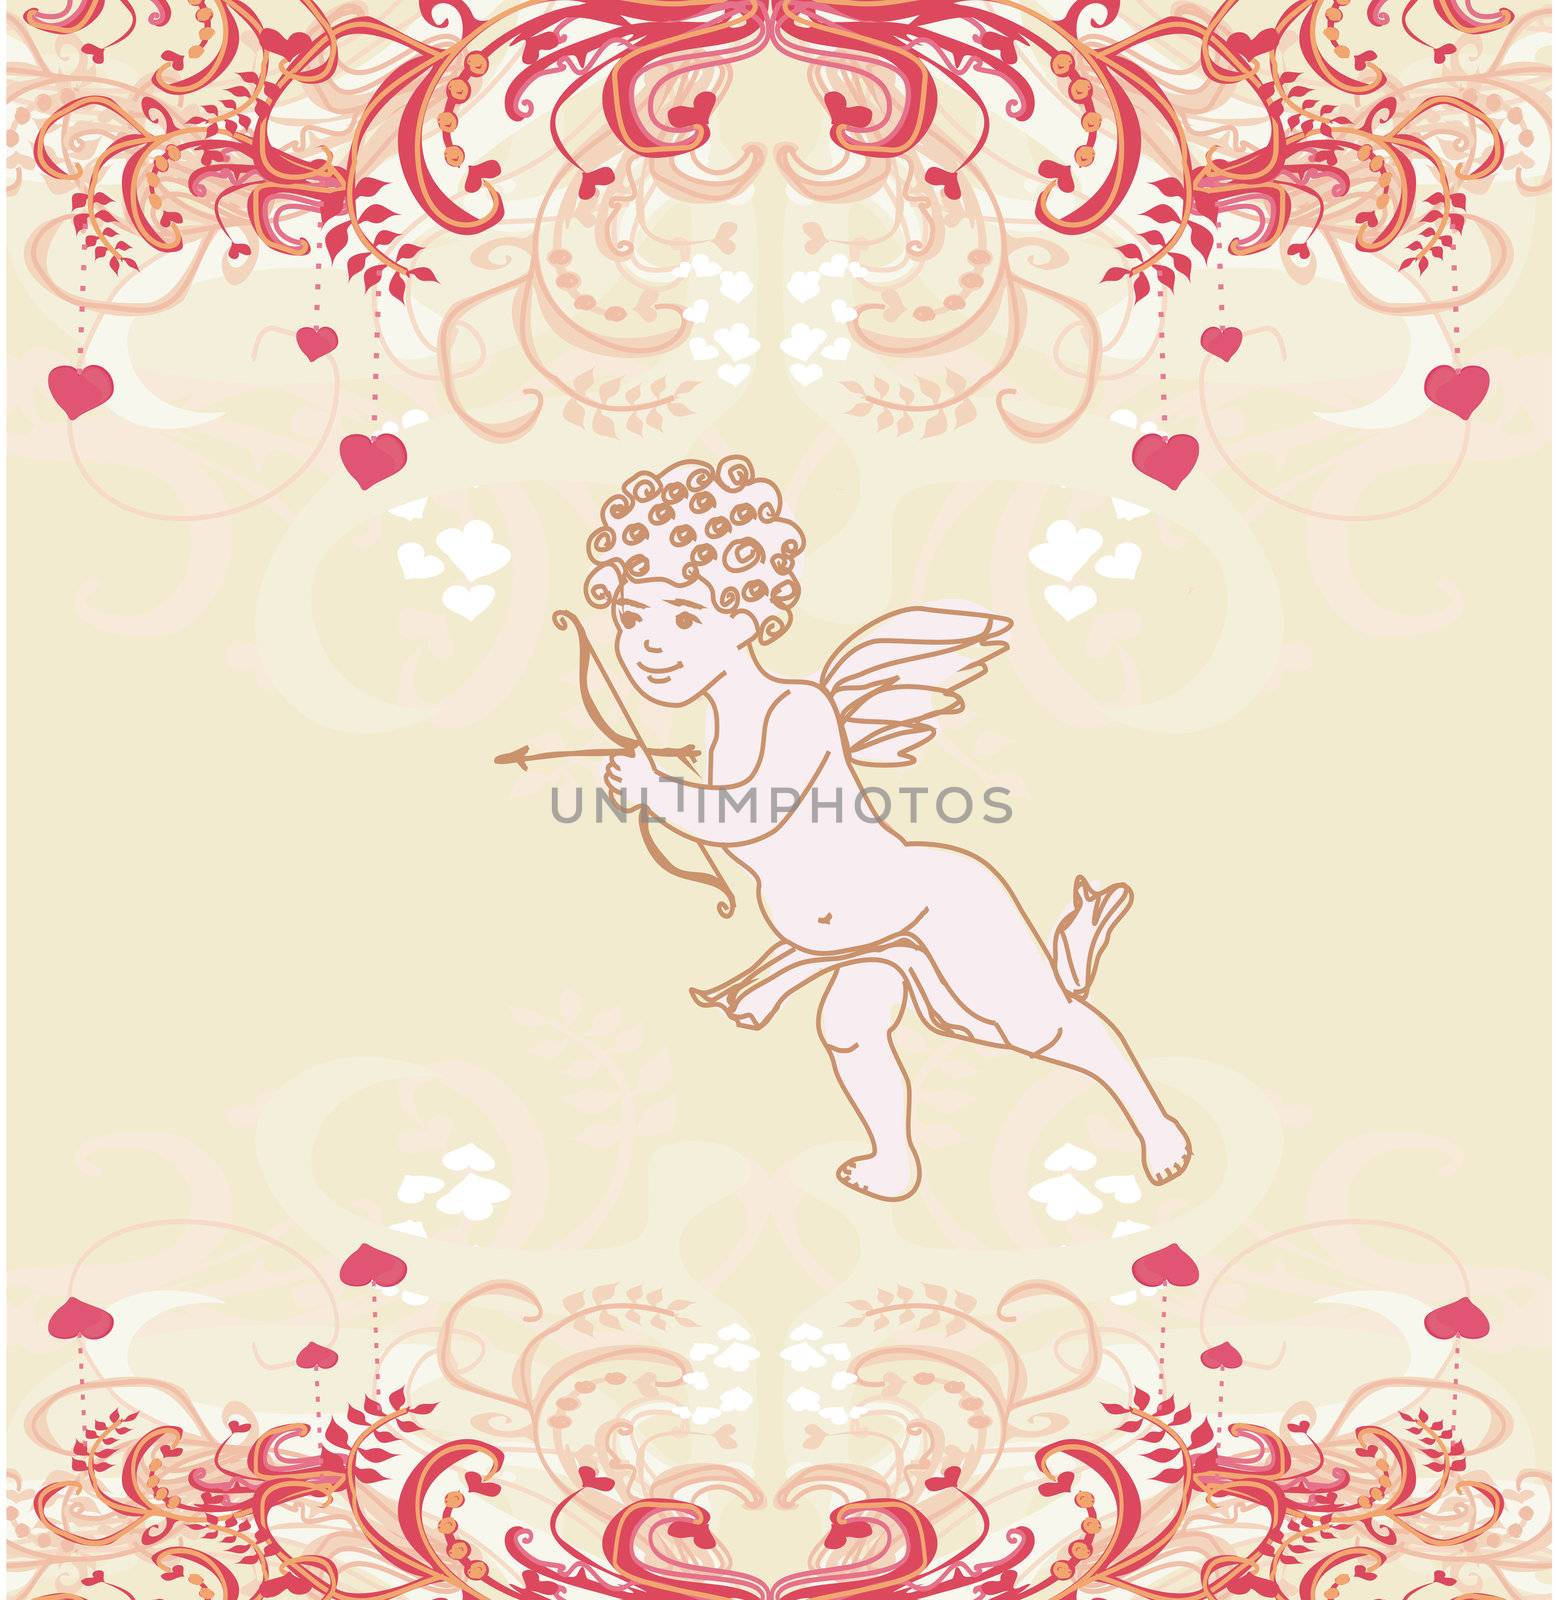 happy valentine's day card with cupid by JackyBrown